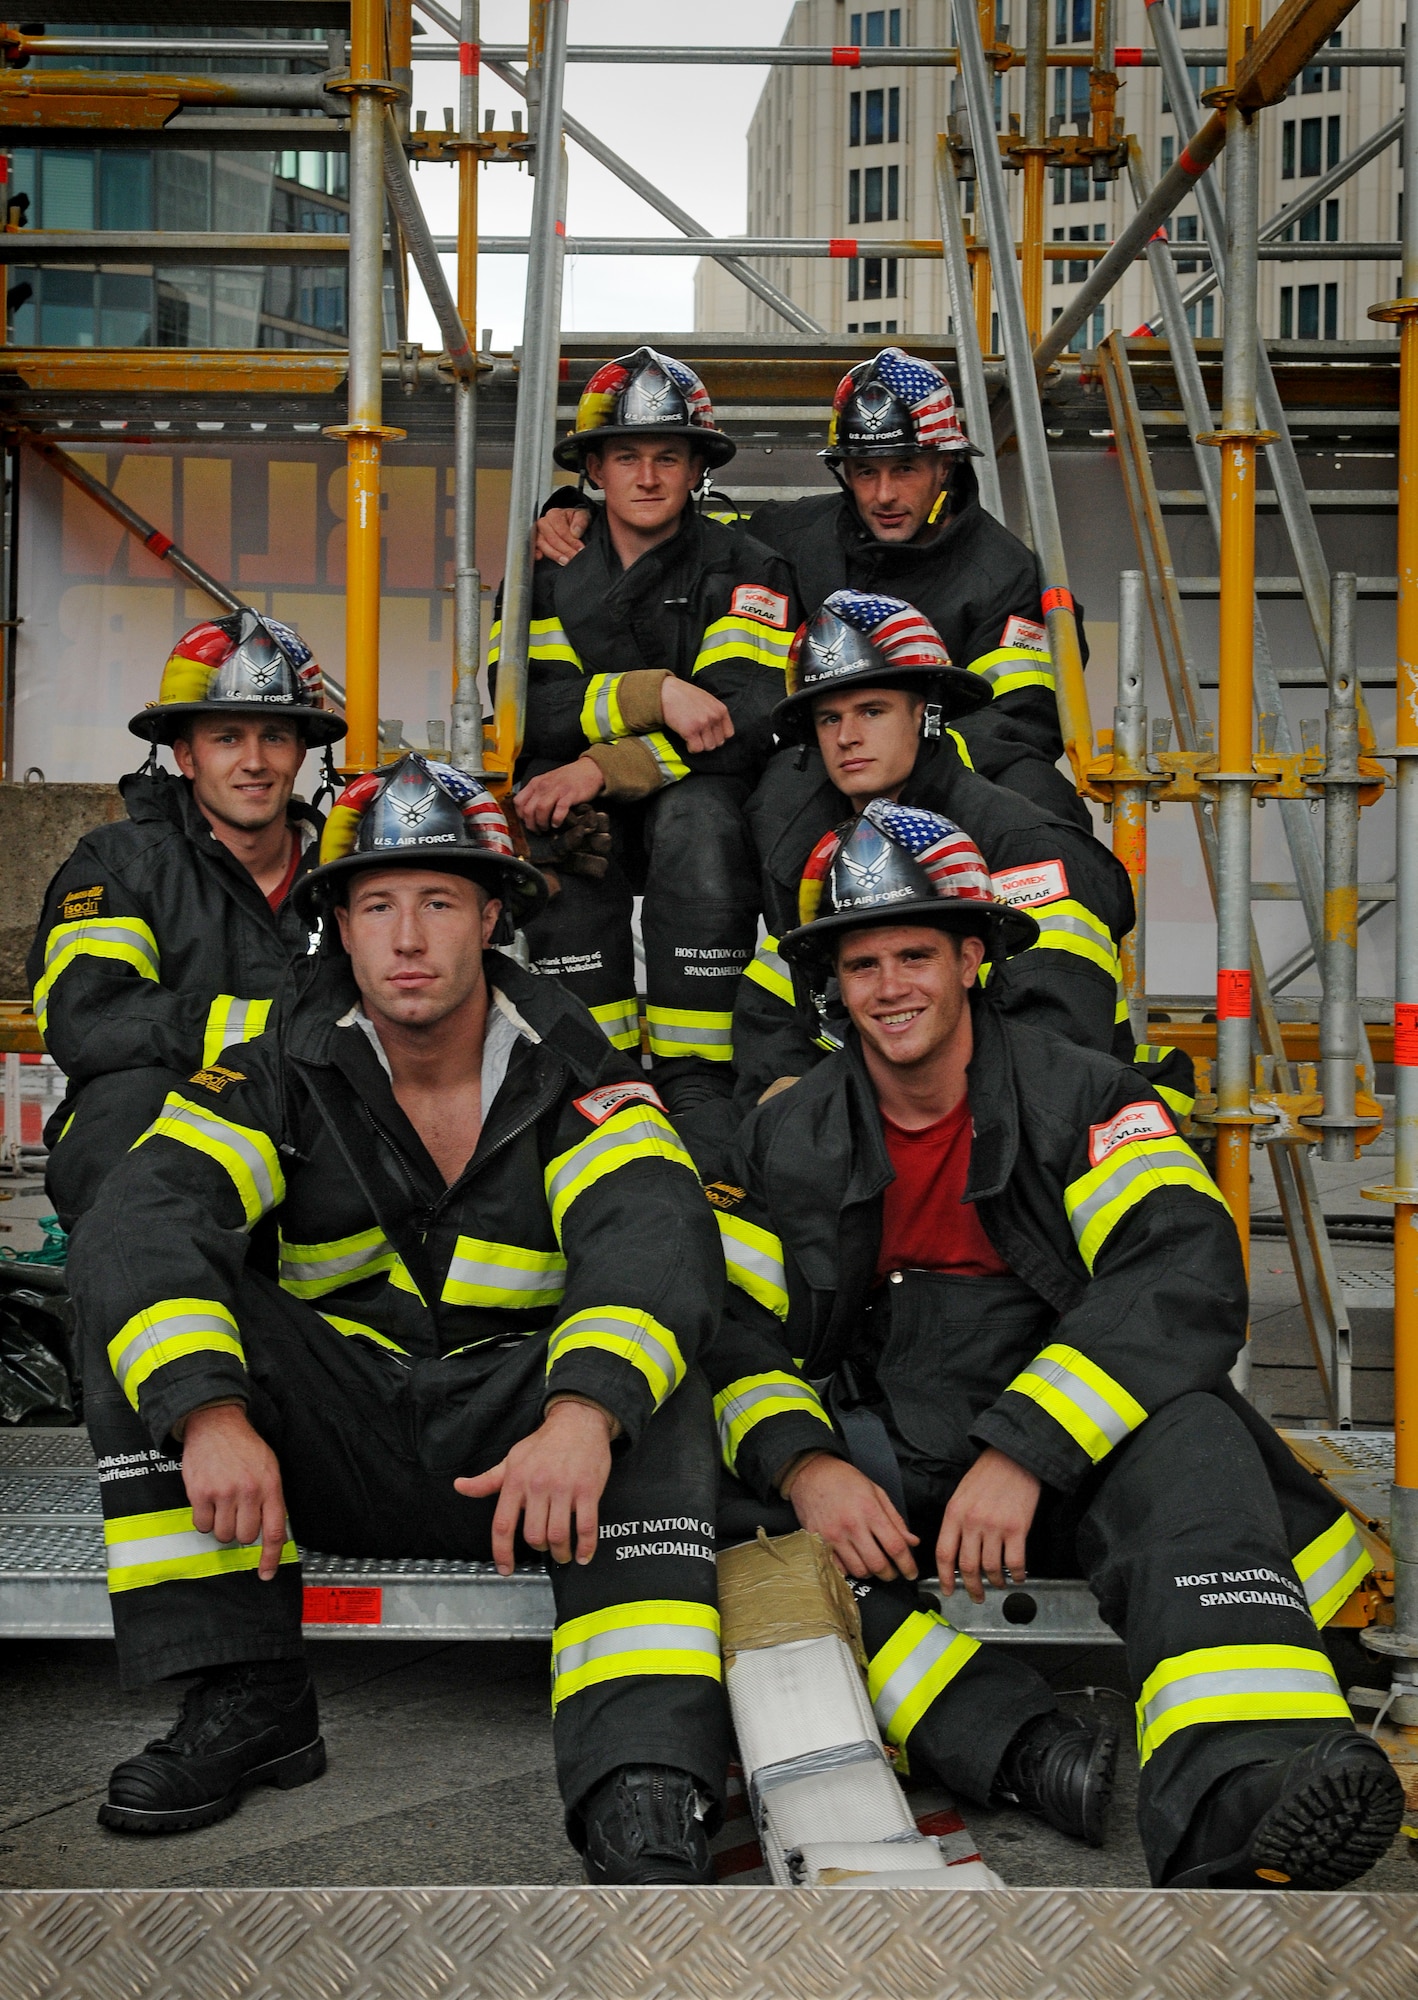 BERLIN, Germany – Spangdahlem firefighters pose for a team photo on the tower of the firefighter obstacle course in Berlin Sep. 4. The obstacle course was constructed to host the fourth Berlin Firefighter Combat Challenge, which was a two-day event with firemen from throughout Europe participating. (U.S. Air Force photo/Staff Sgt. Benjamin Wilson)